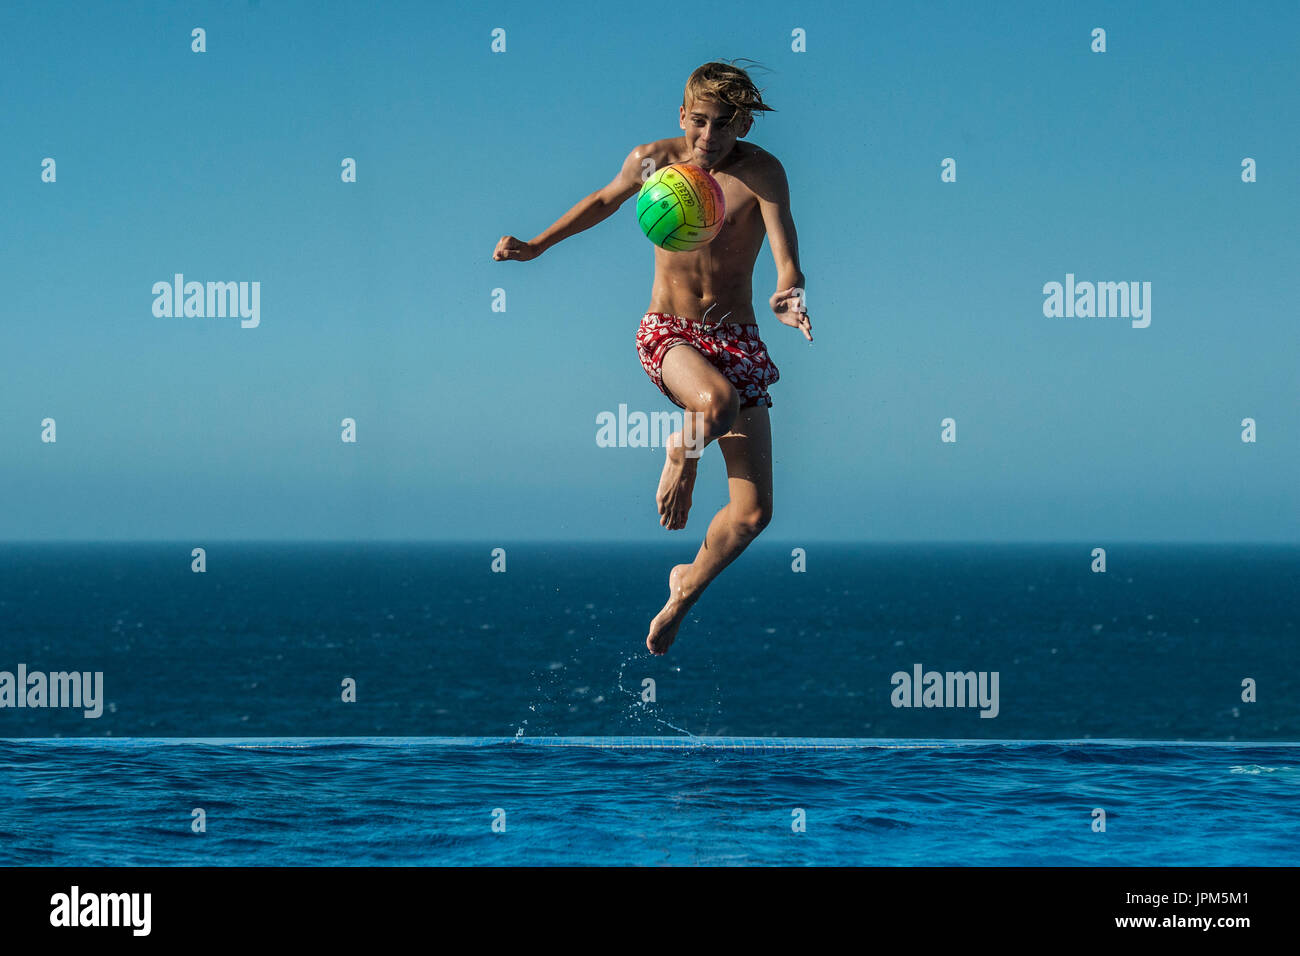 A boy jumps to kick a ball in an infinity pool in the summer, playing football  on holiday Stock Photo